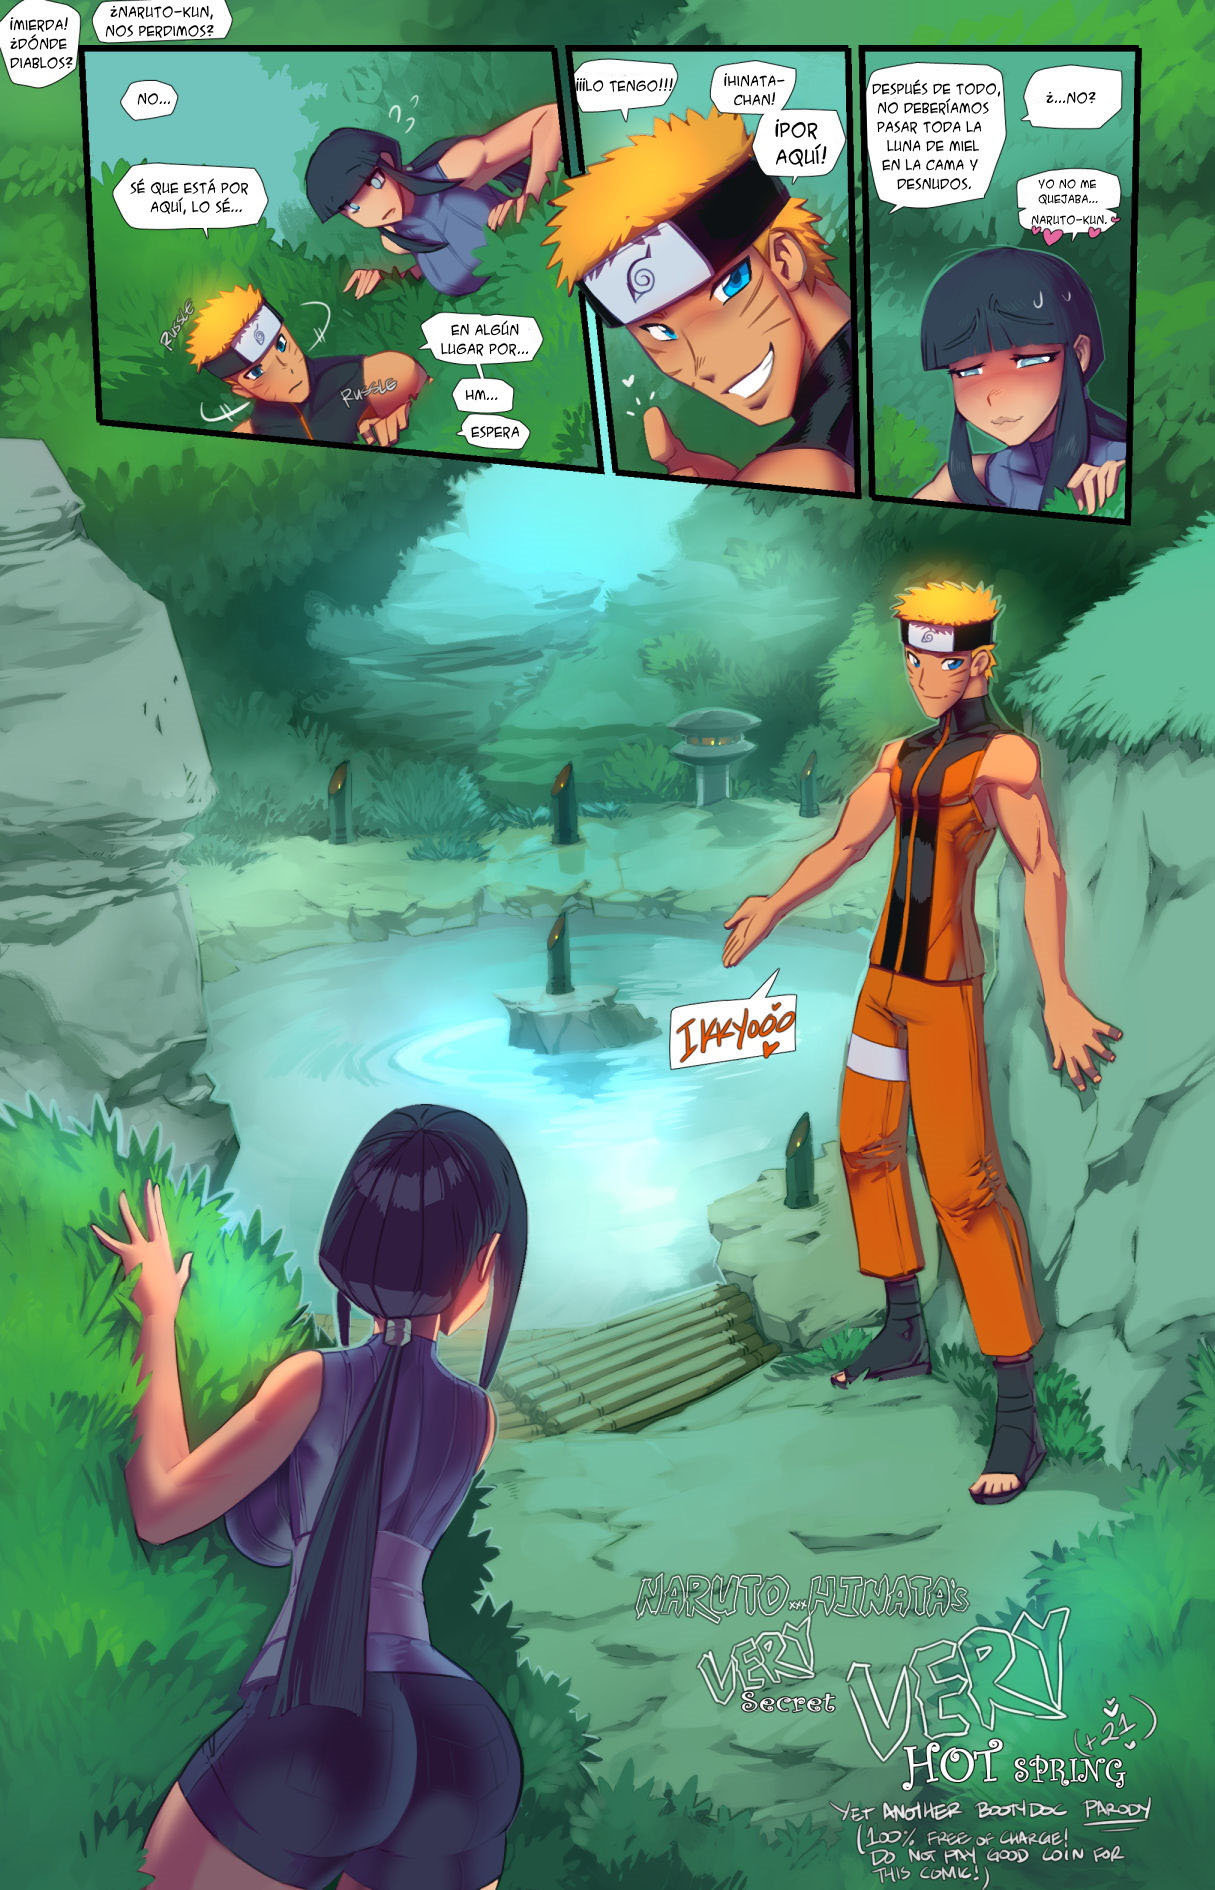 NARUTO x HINATA Very Secret Very Hot Spring by Fred Perry - 0